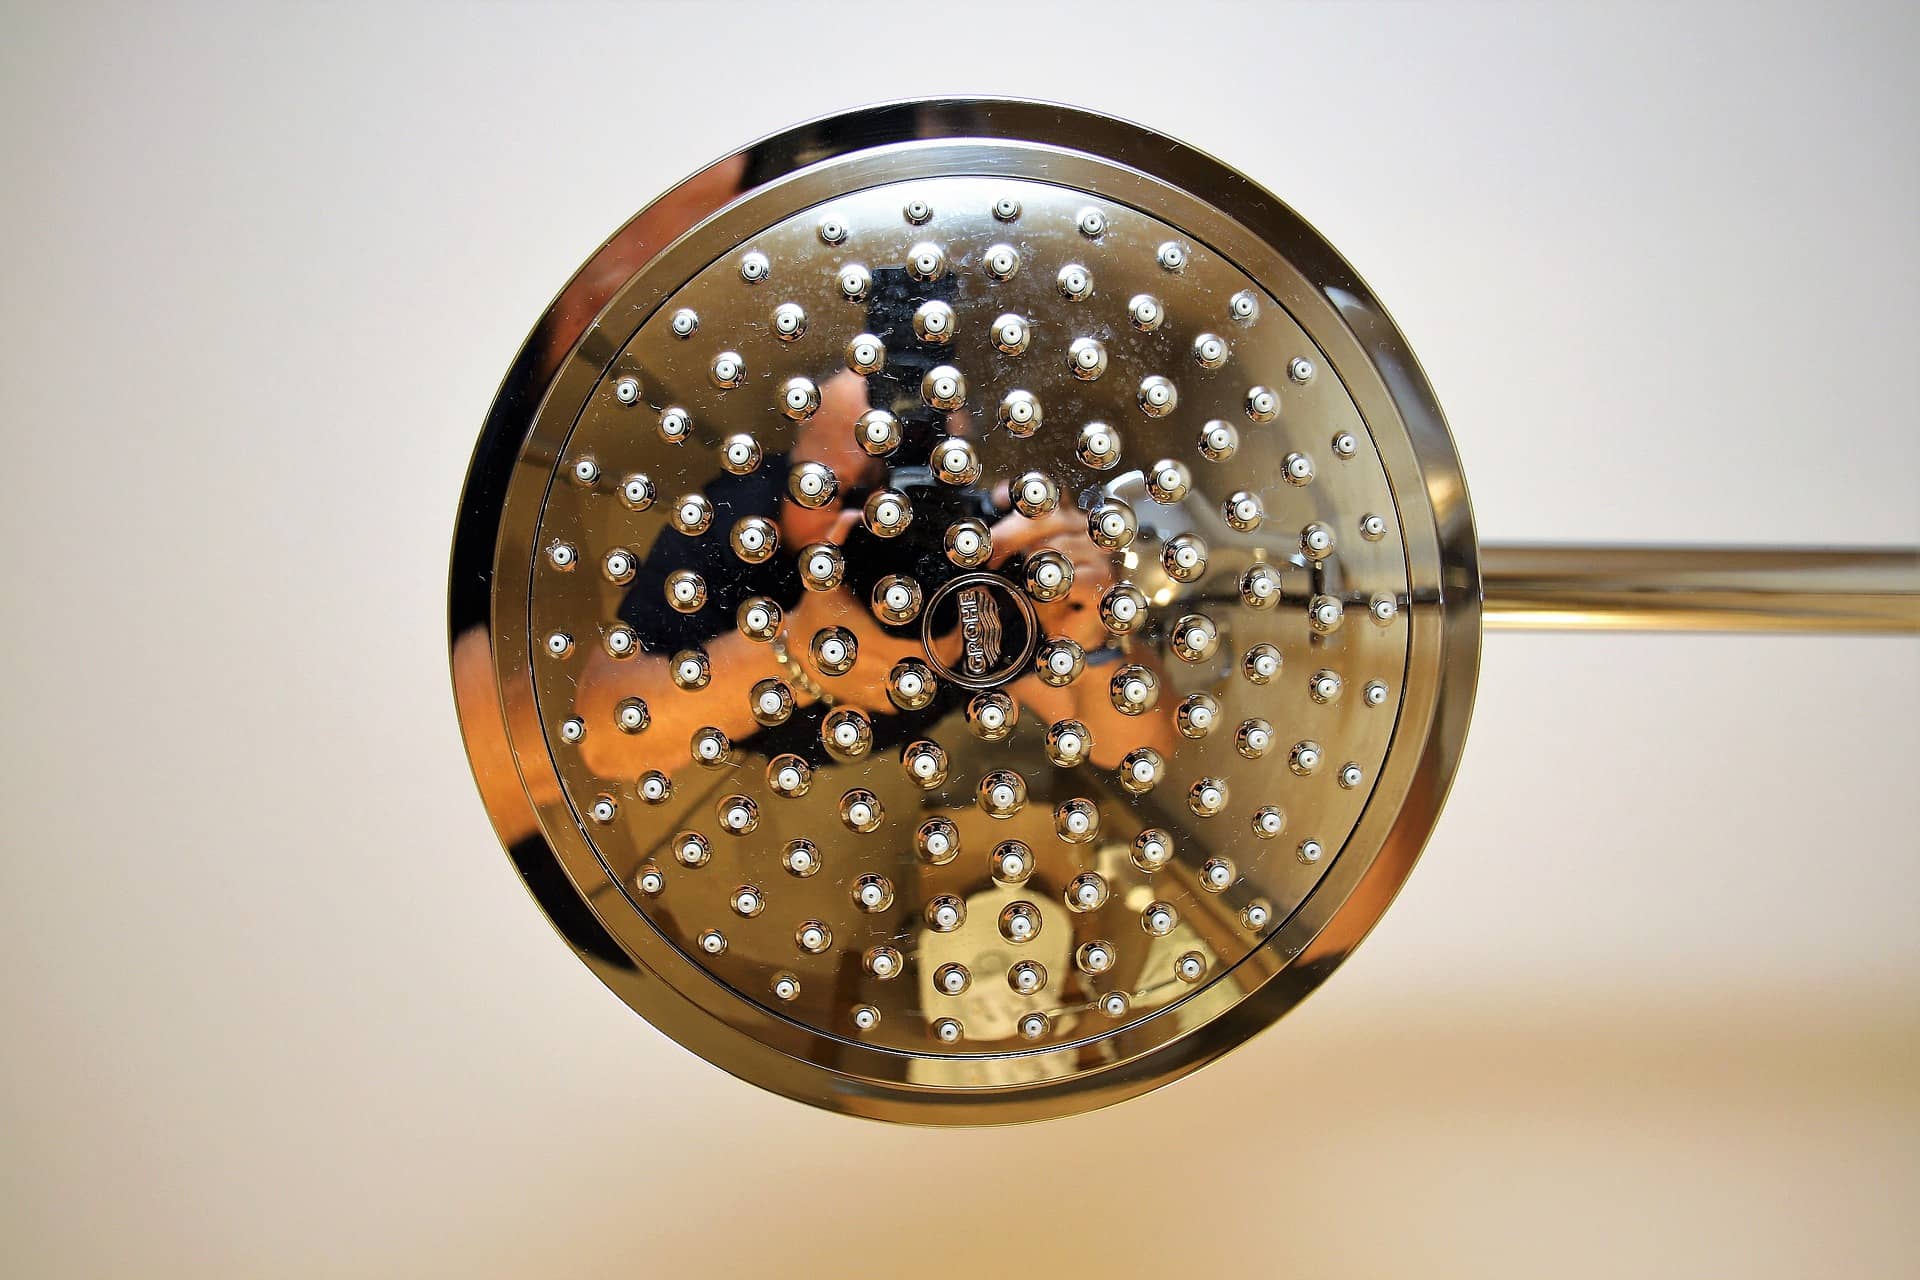 Best High-Pressure Shower Head Buying Guide